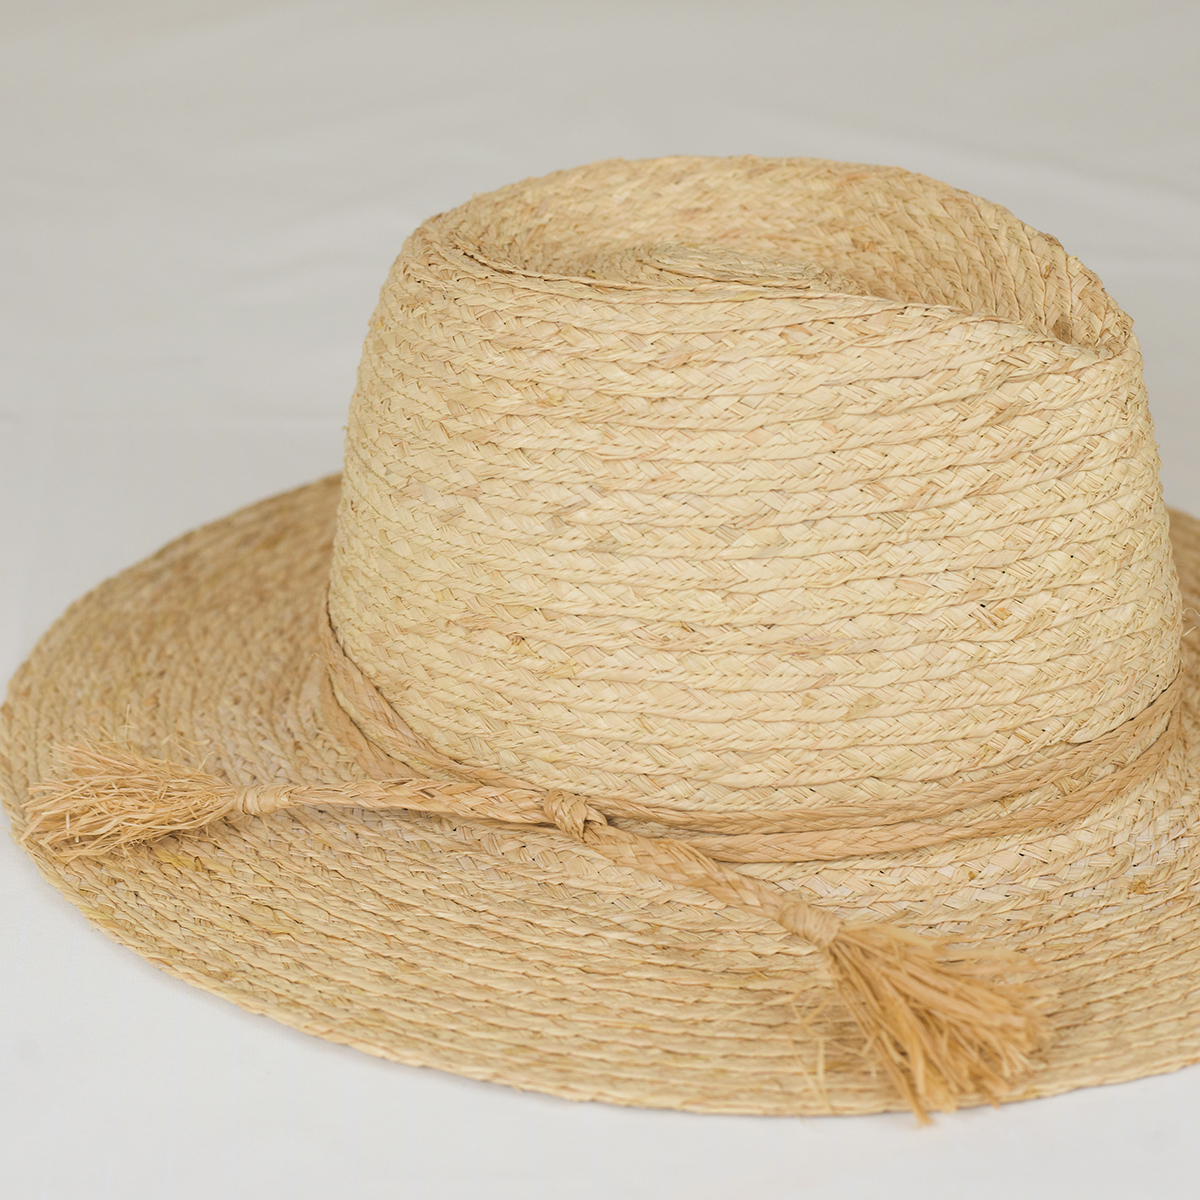 Copy of Anh raffia fedora hat details 2.0small file (1) (1)